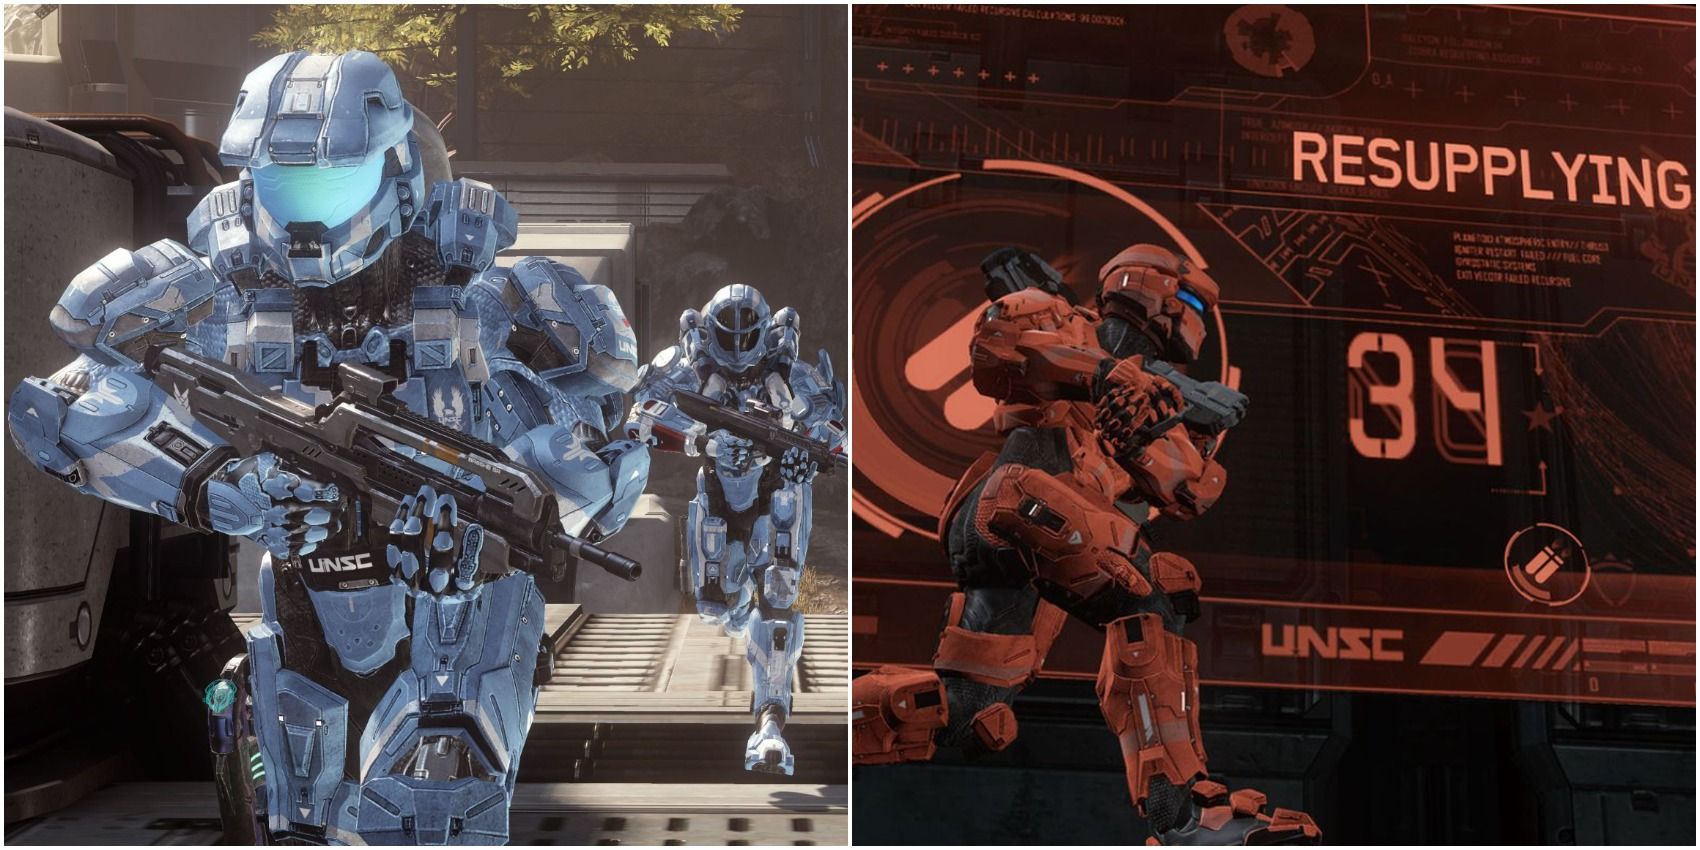 Halo 4 Tactical Upgrades including Mobility and Resupply